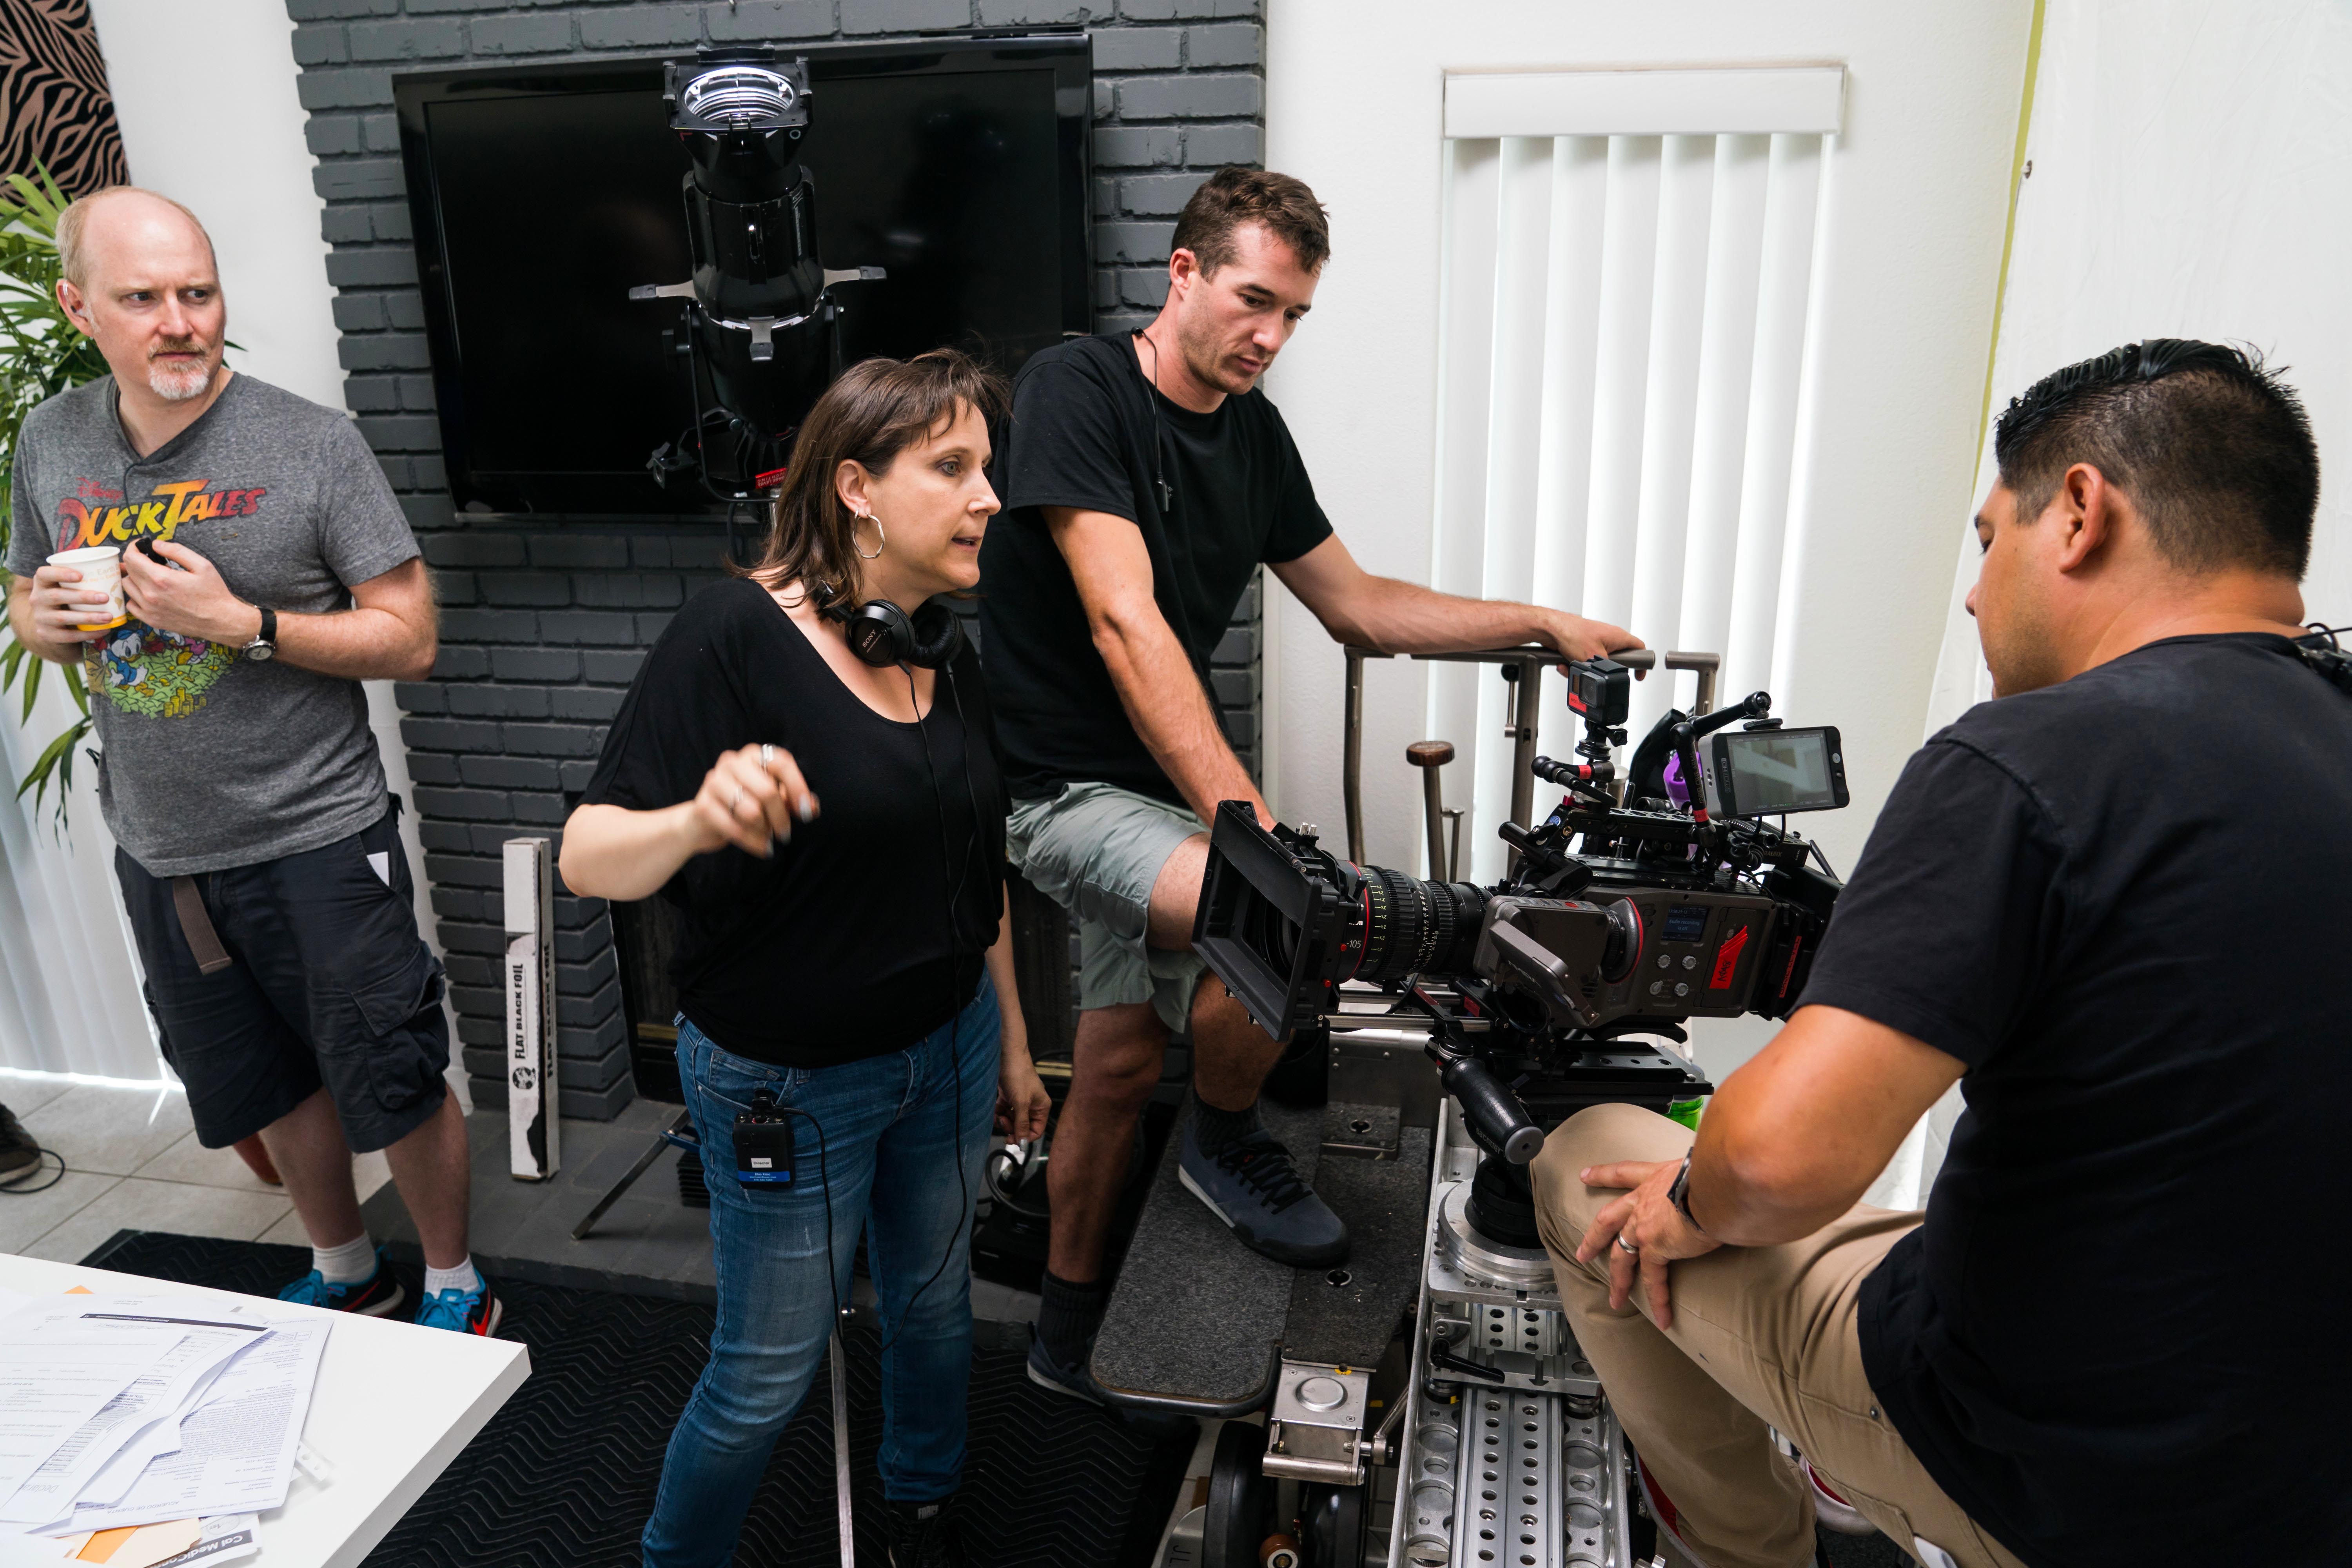 Lane Shefter Bishop (center, with the headphones) on the set of “The Personal Trainer. Photo: Ashly Covington 